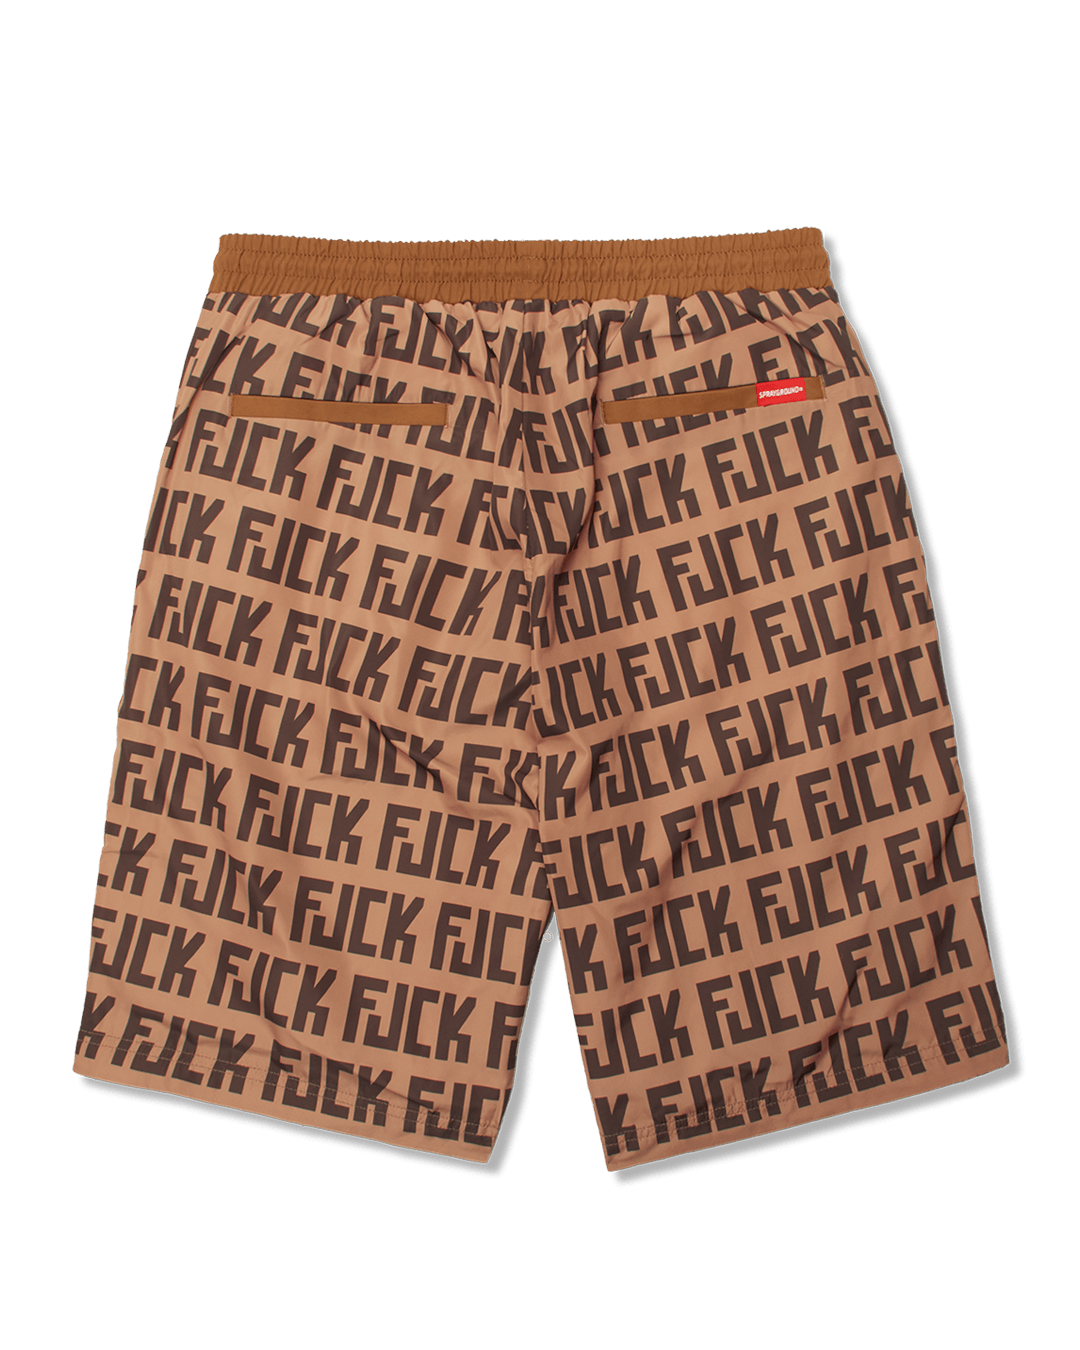 HOT SALE ☆☆☆ OFFENDED SHORTS - HOT SALE ☆☆☆ OFFENDED SHORTS-01-1